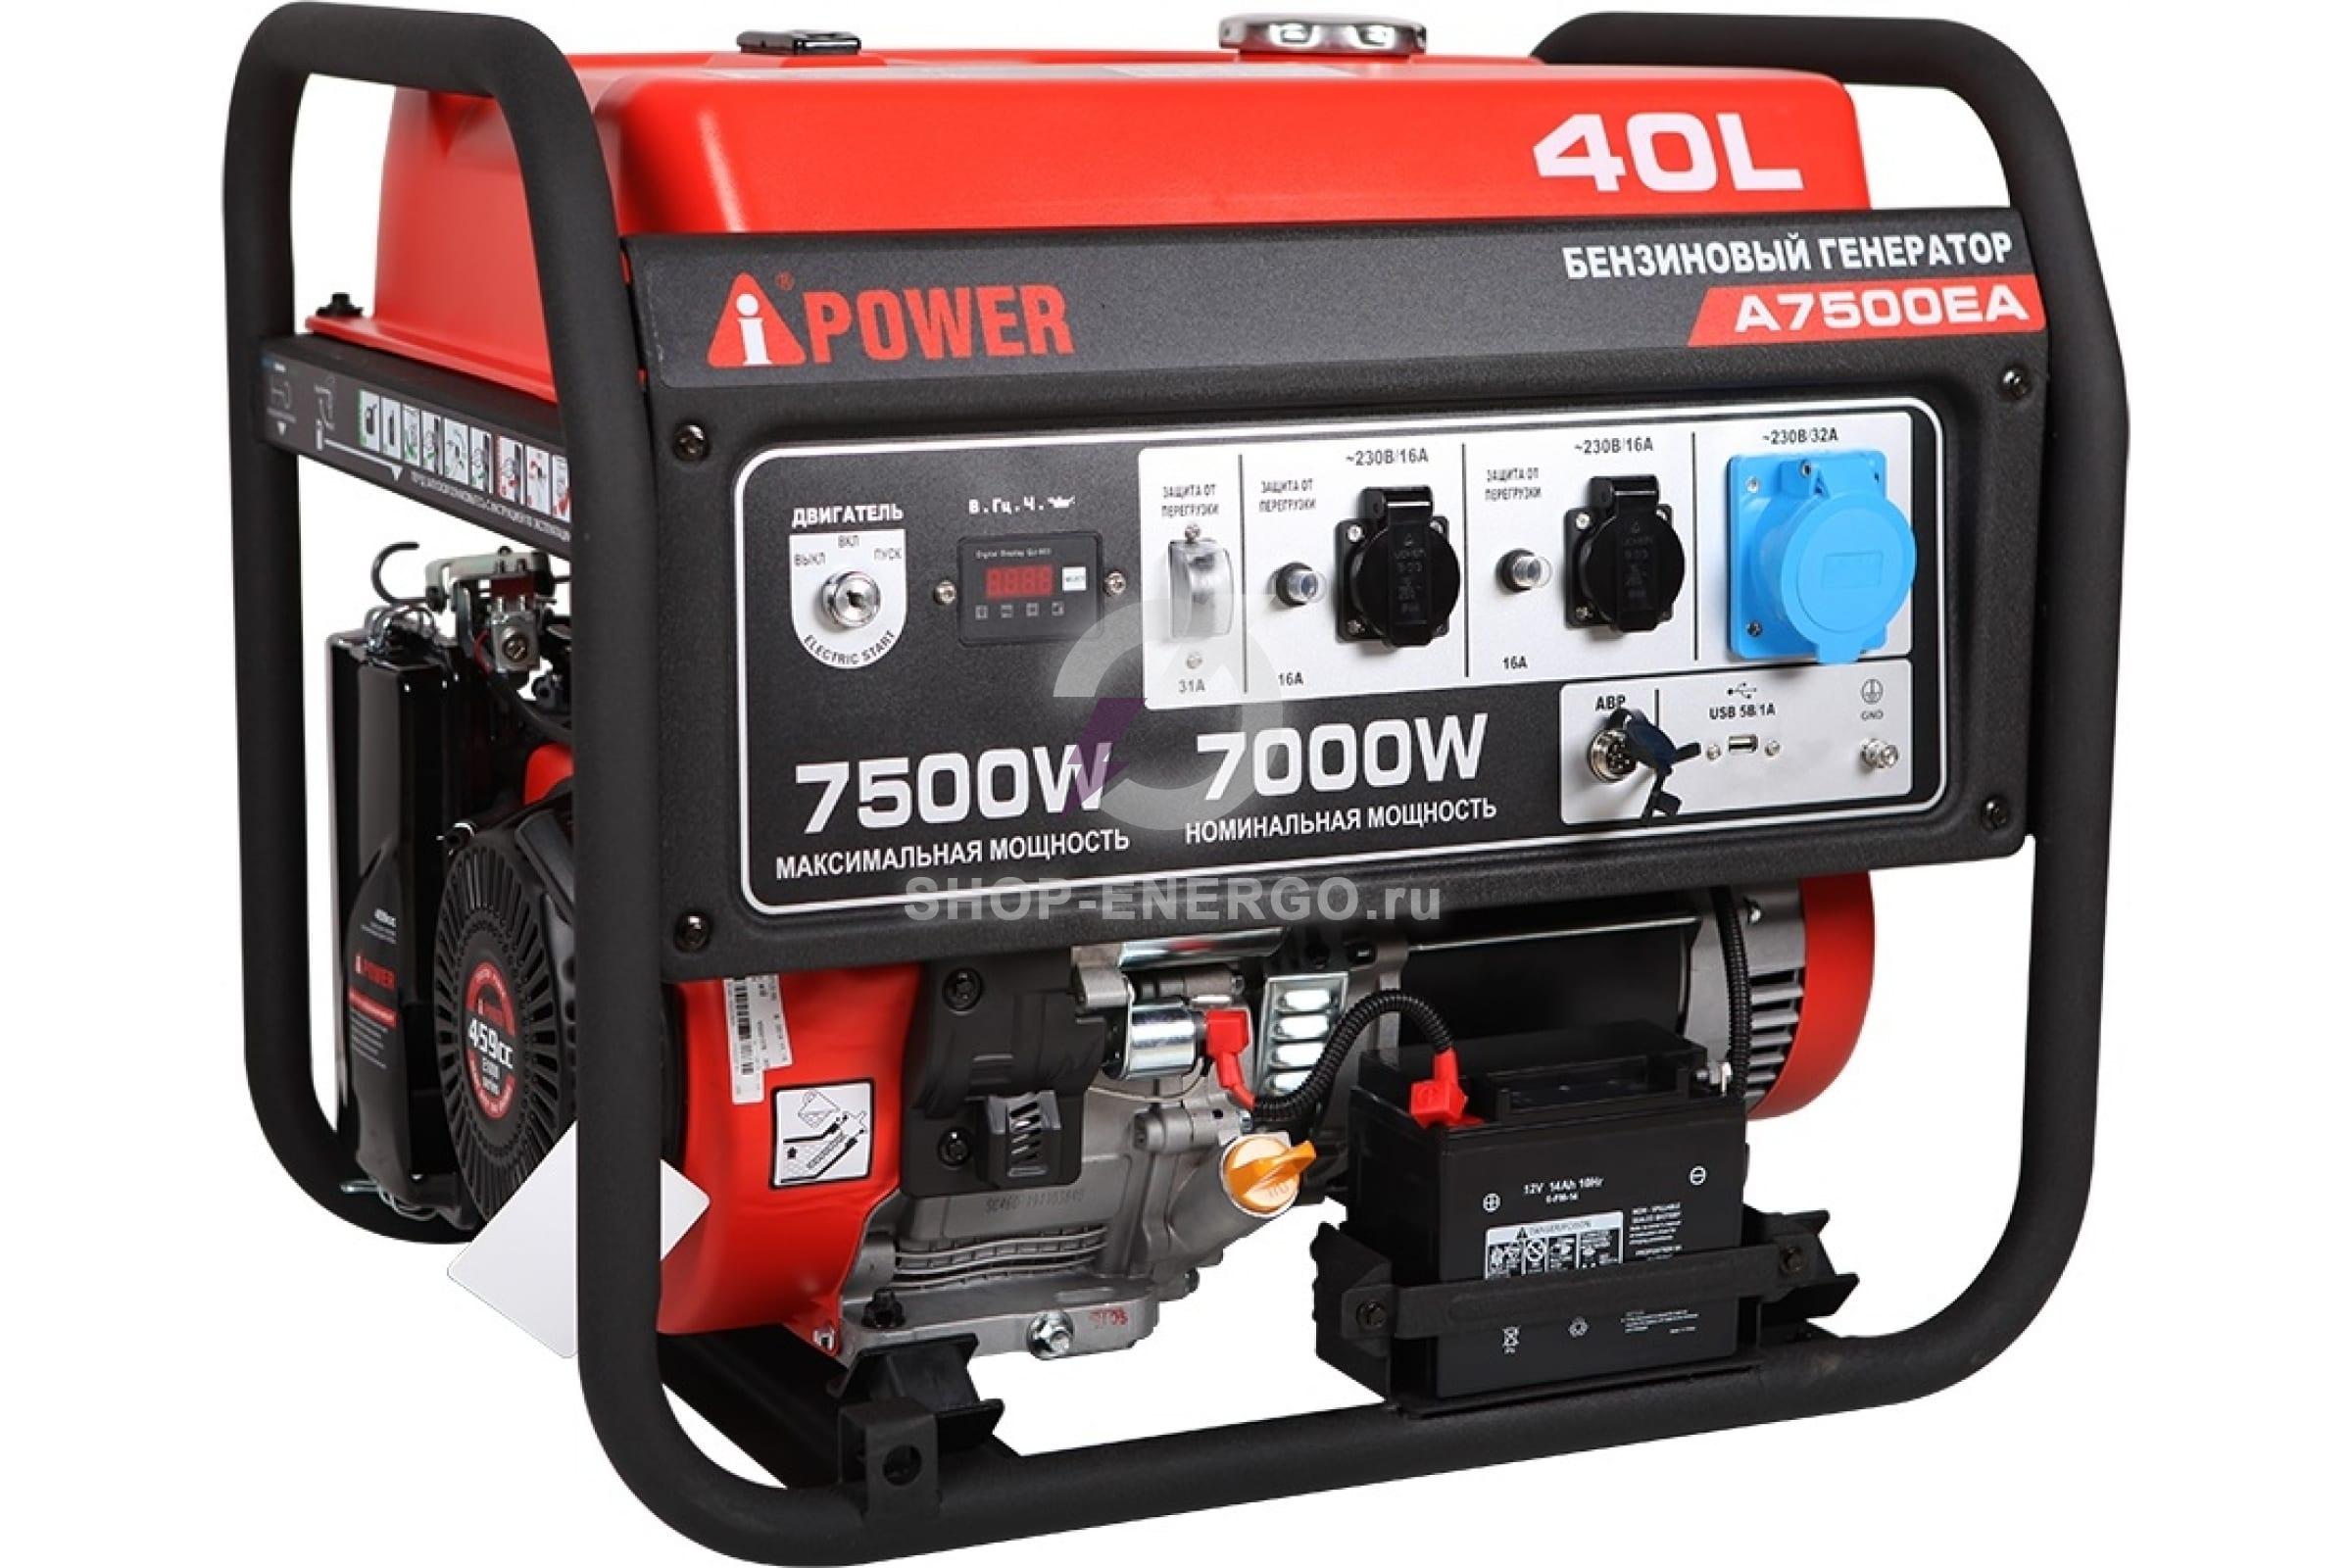   A-iPower A7500EA